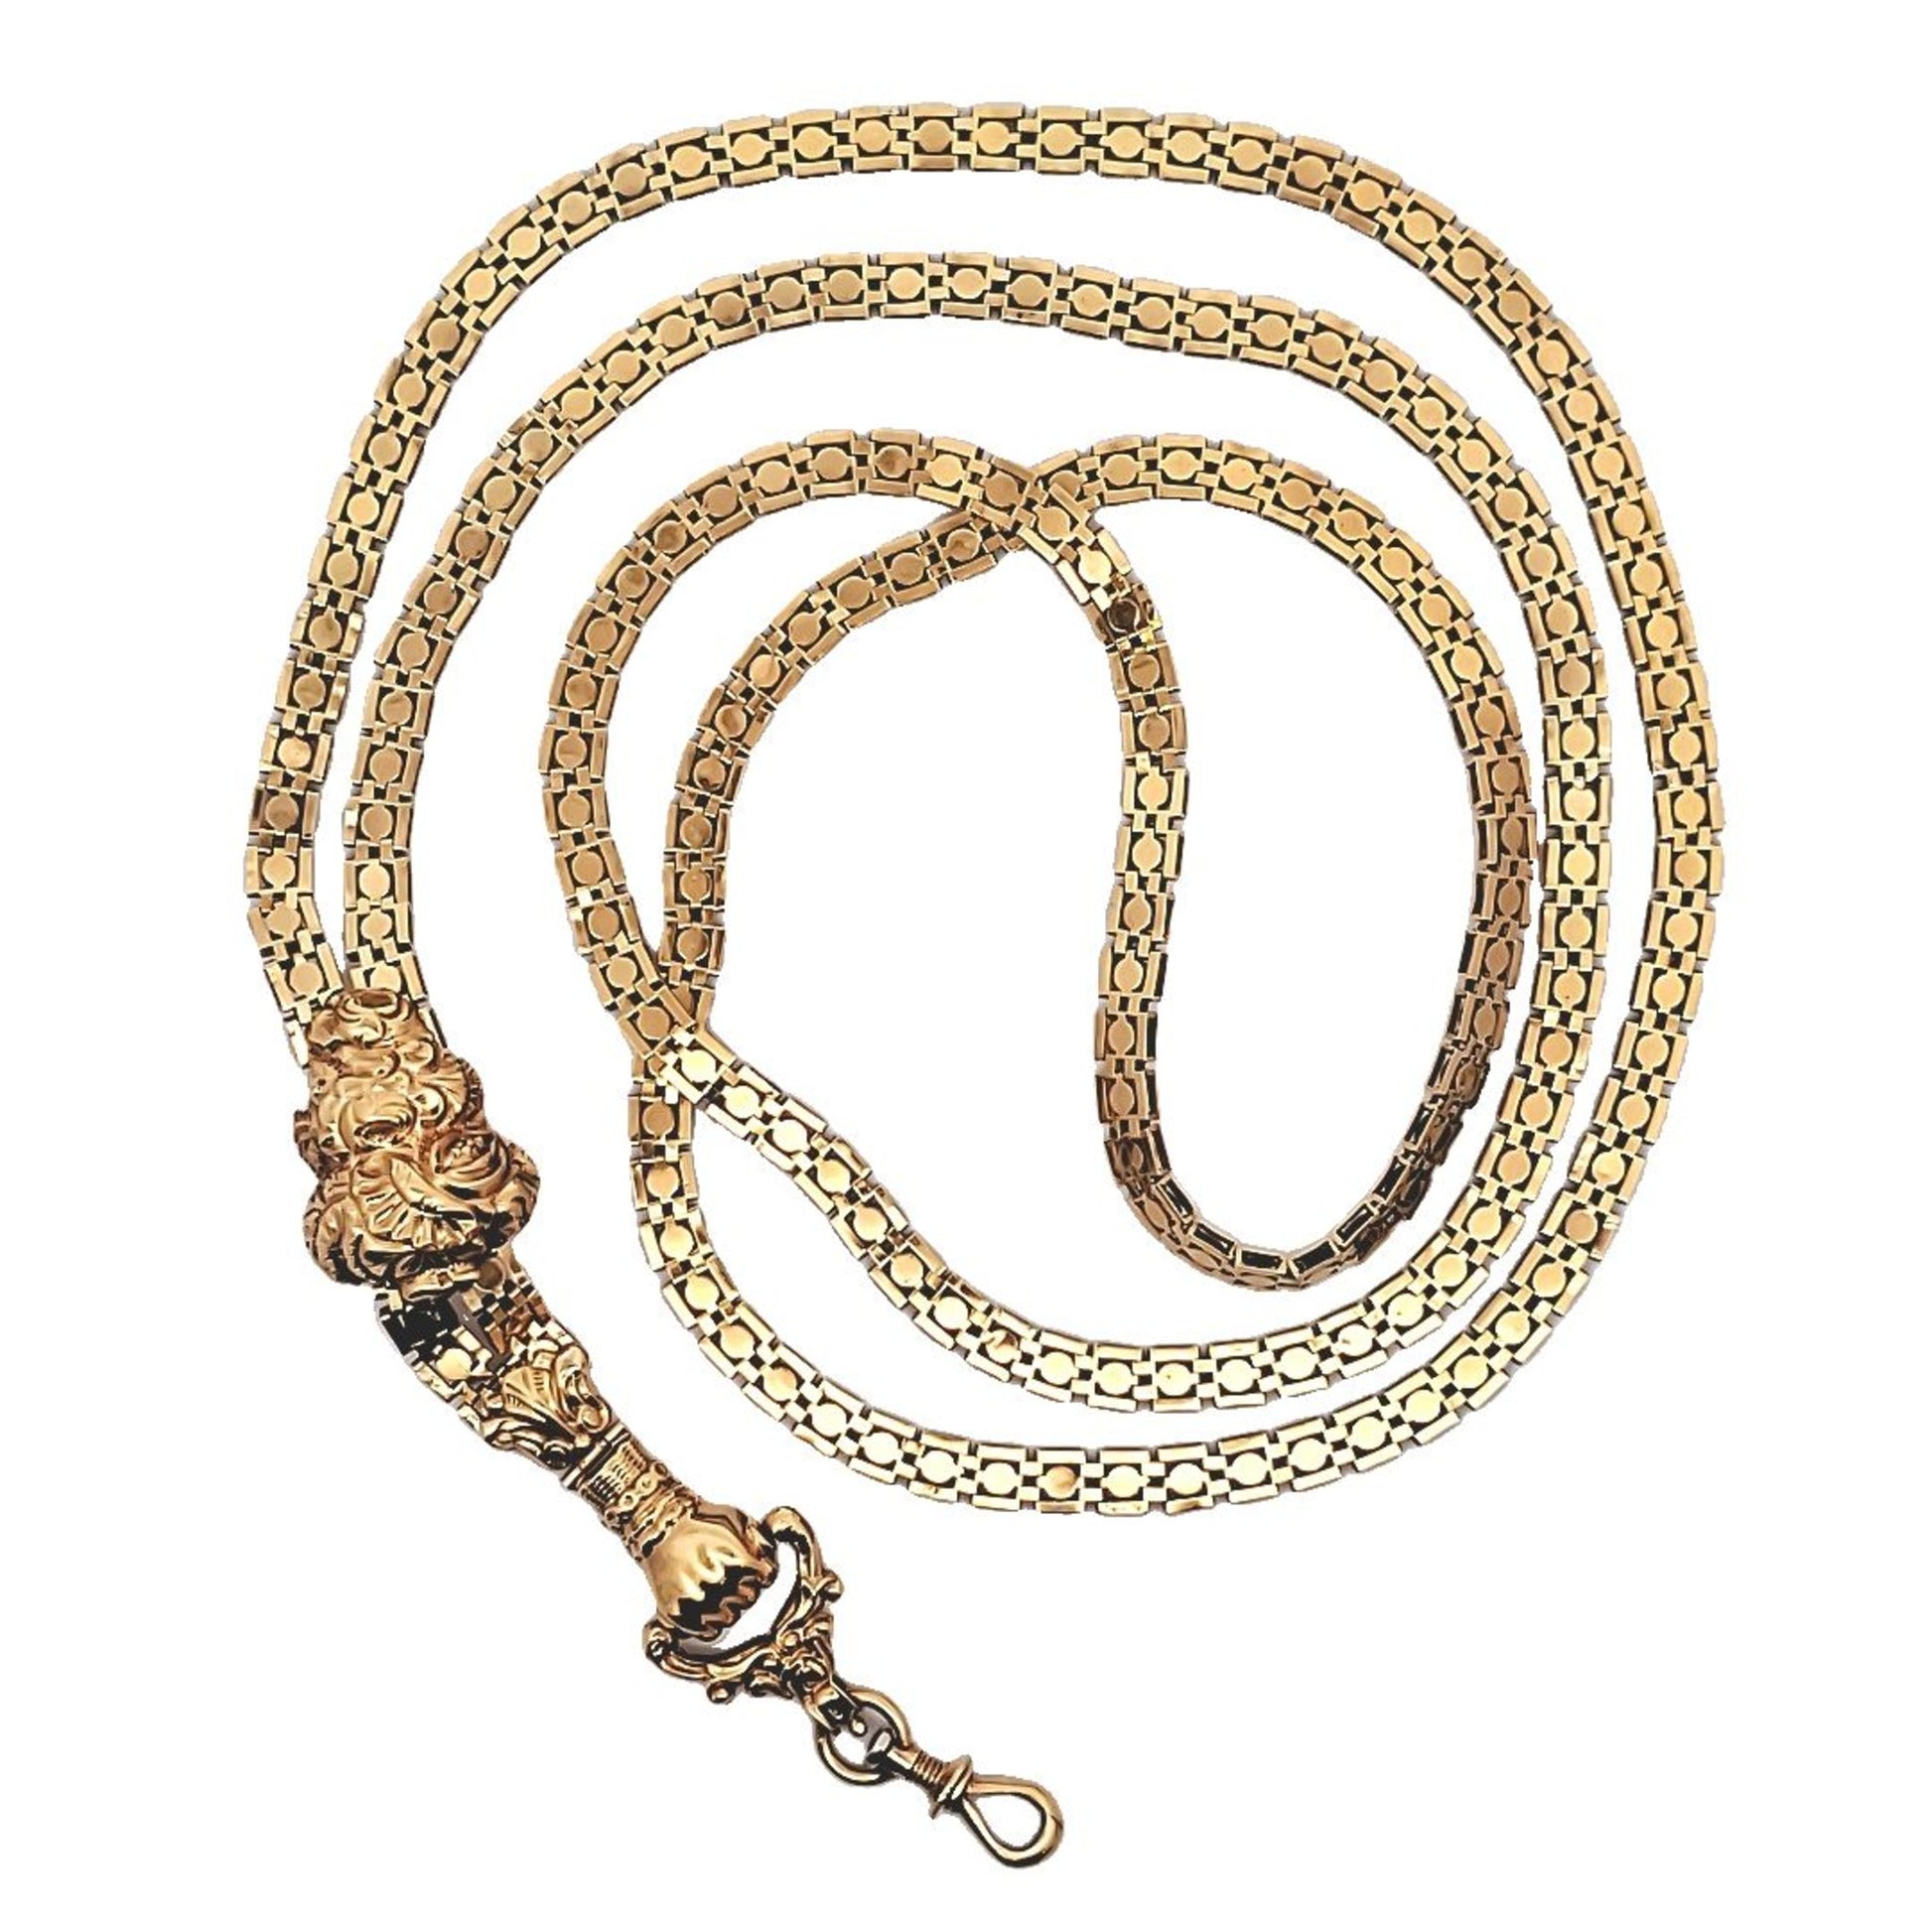 French Antique 18KT Yellow Gold Sautoir Necklace